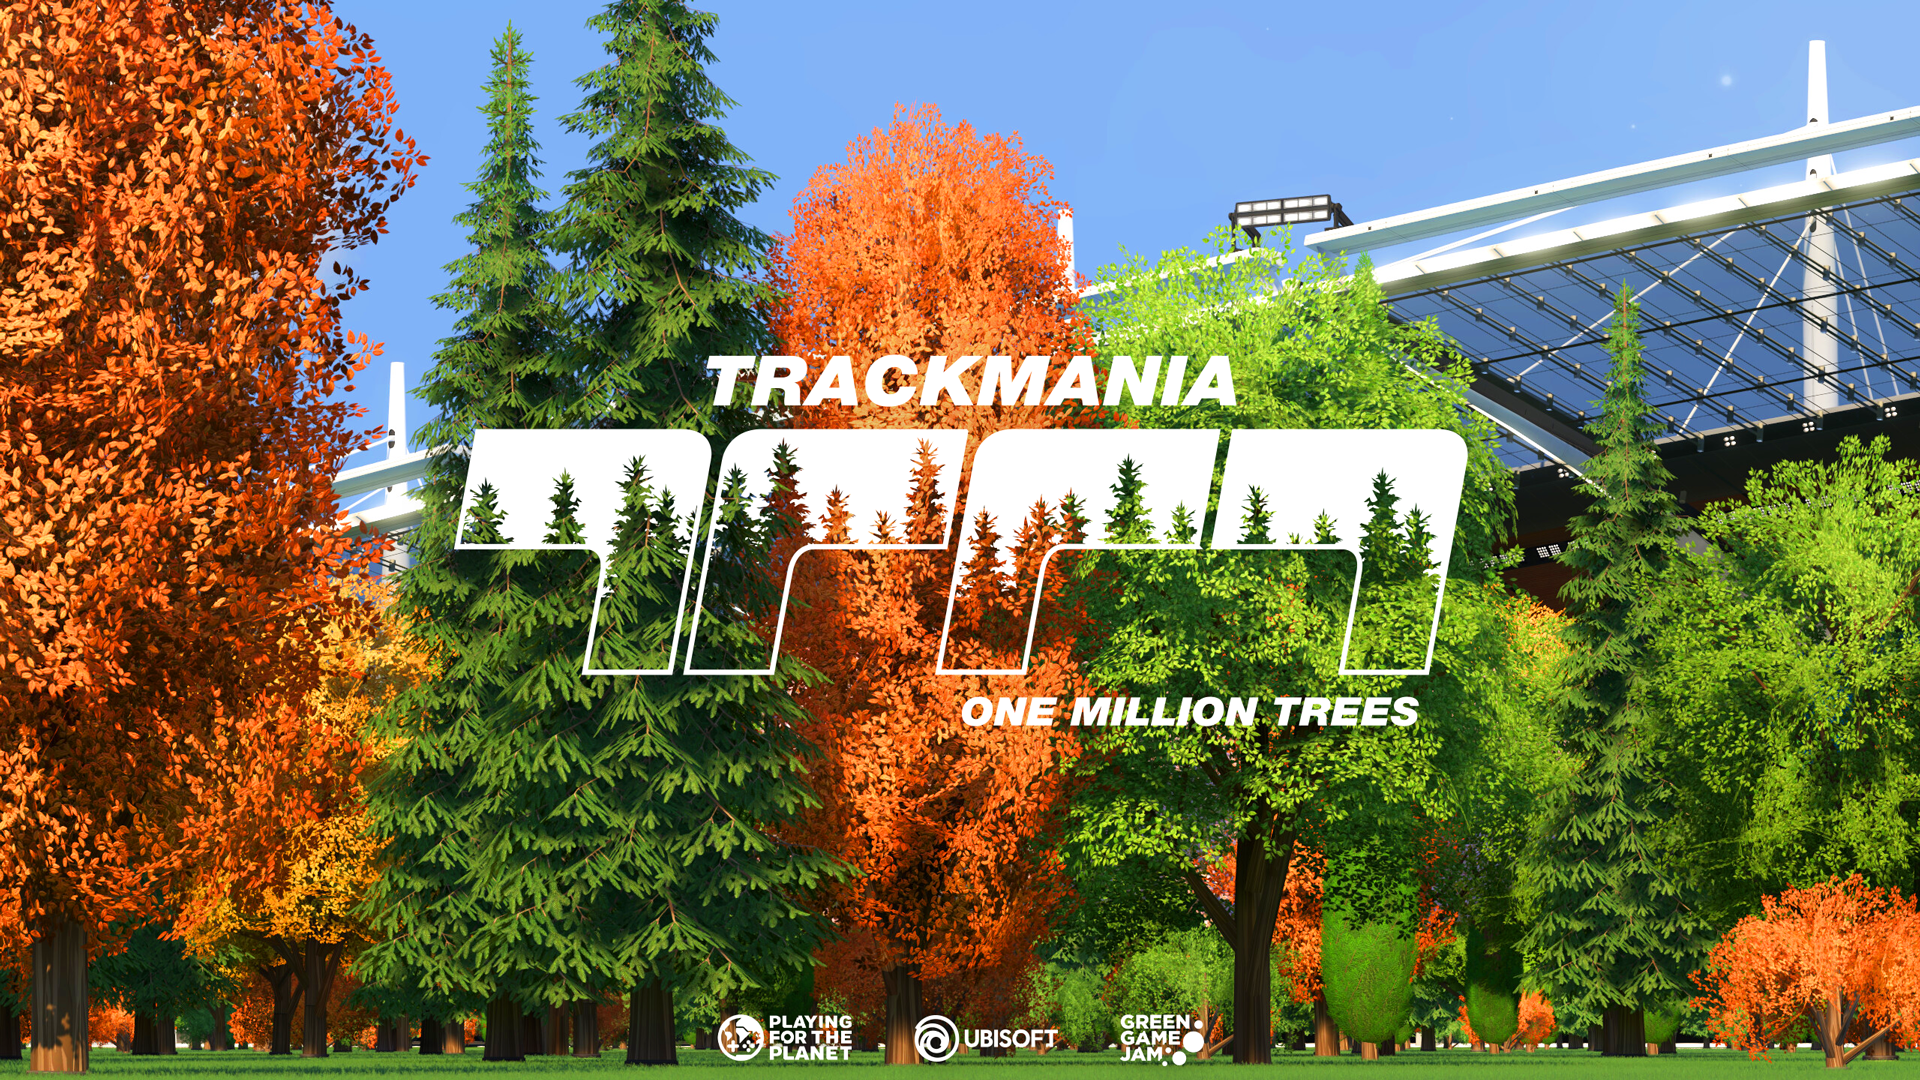 Trackmania, One Million Trees: help us to win the vote